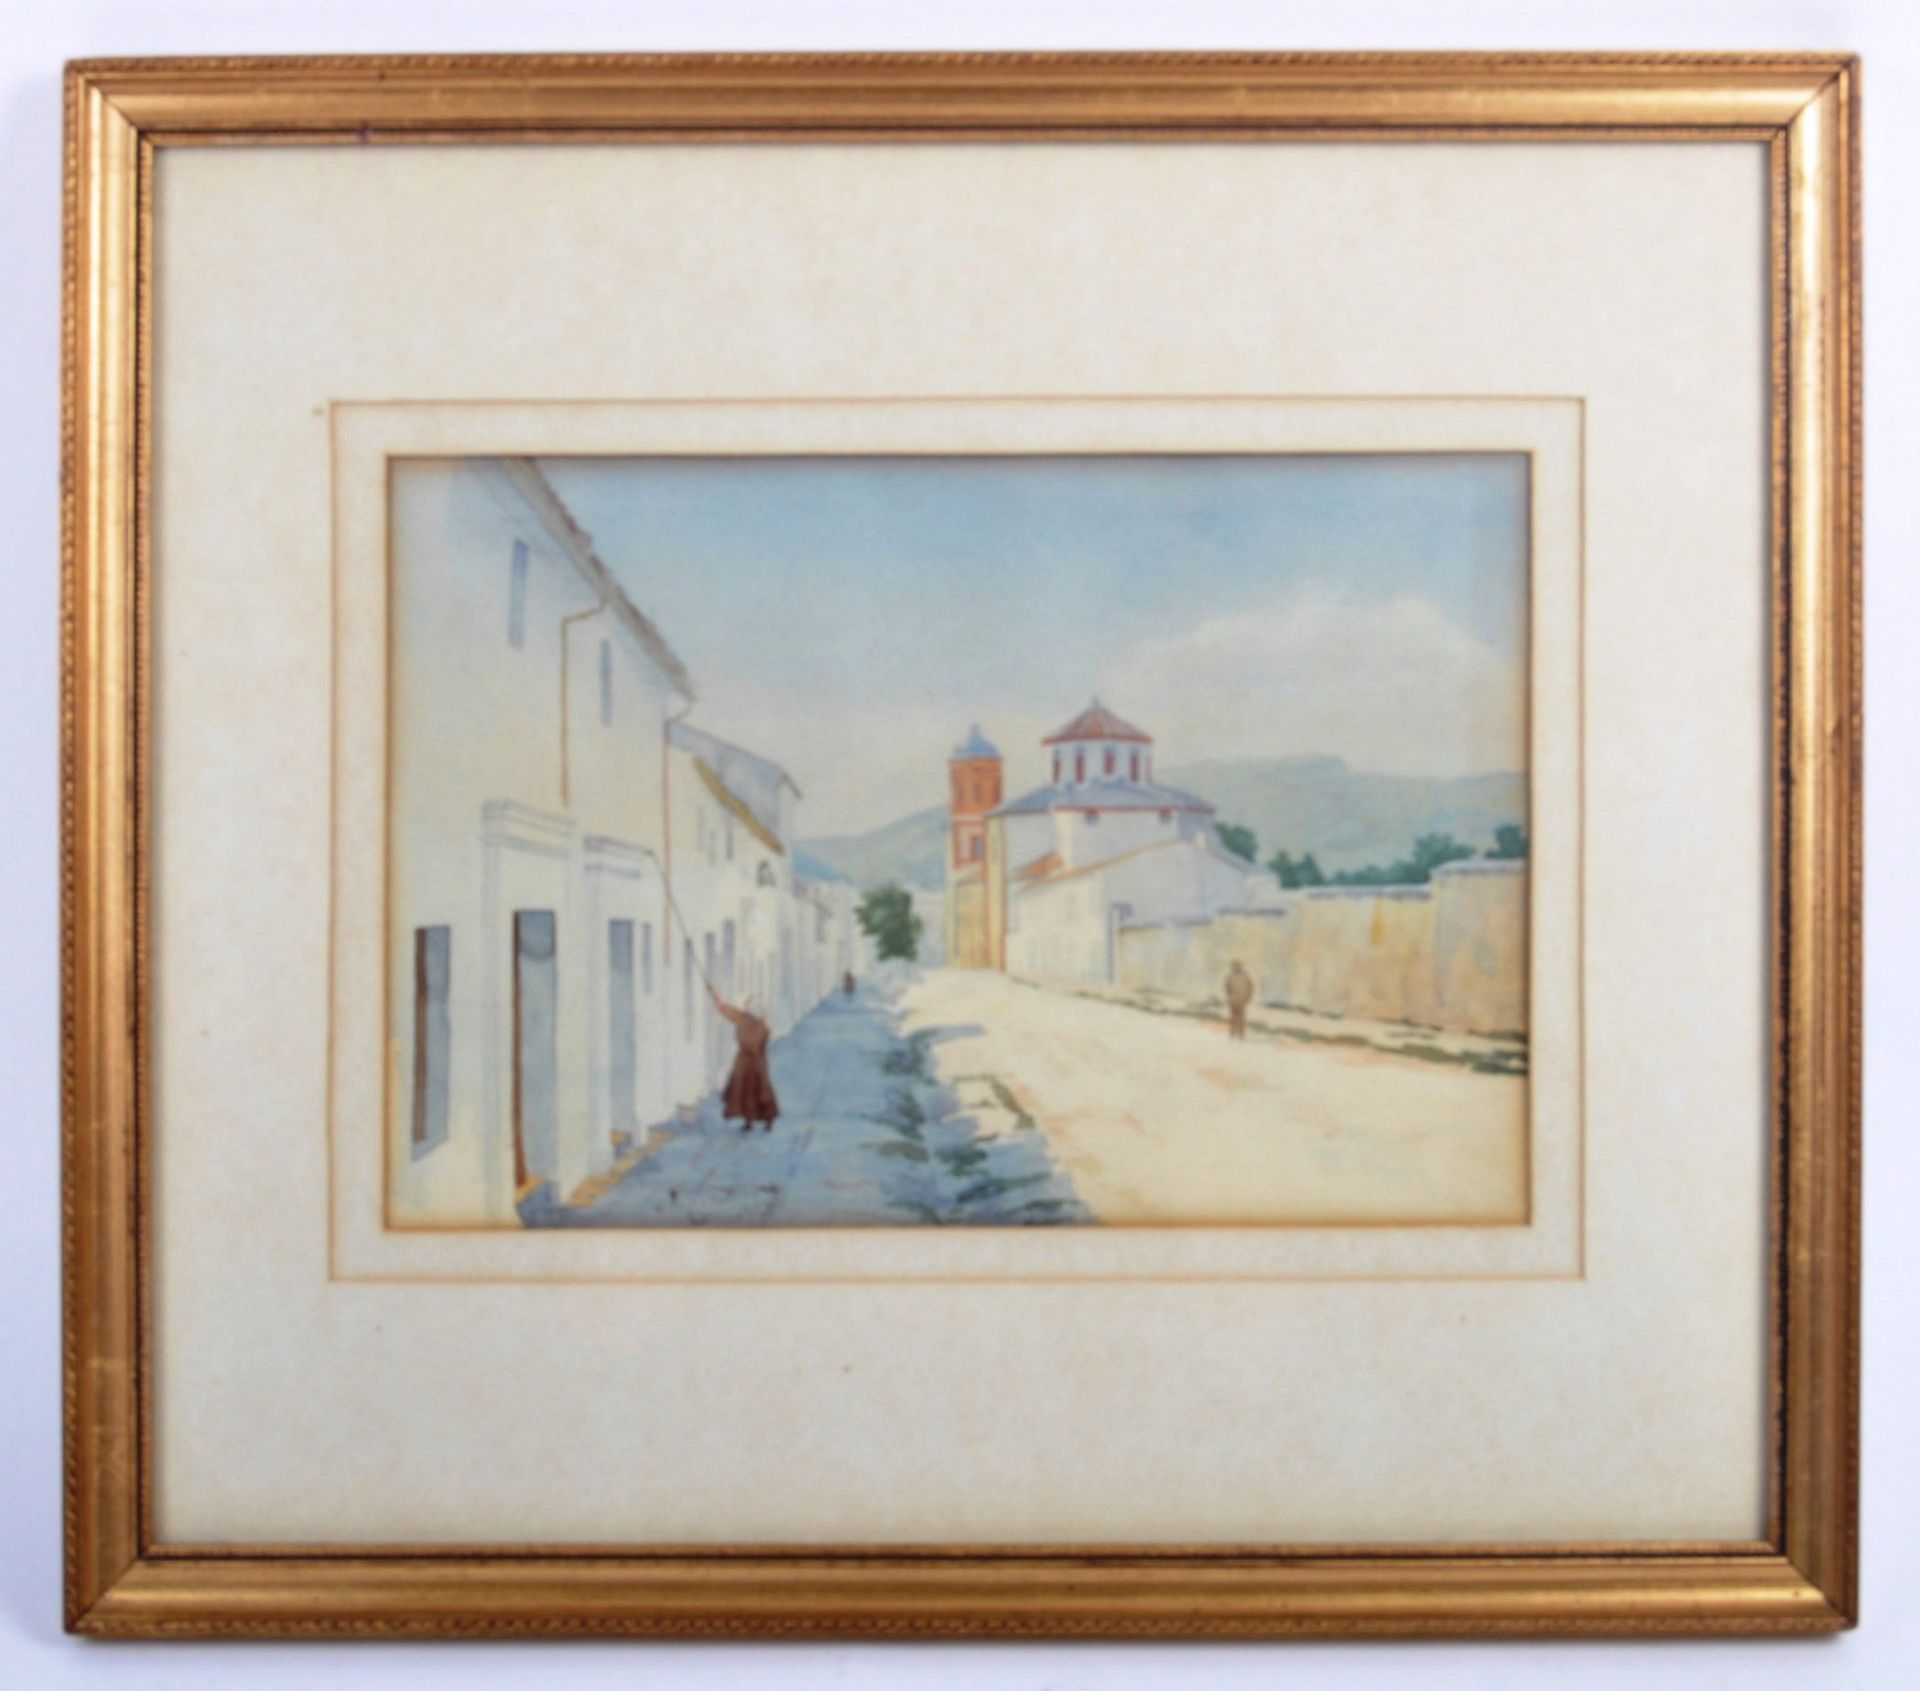 SIGNED ORIGINAL EARLY 20TH CENTURY WATERCOLOUR ON PAPER